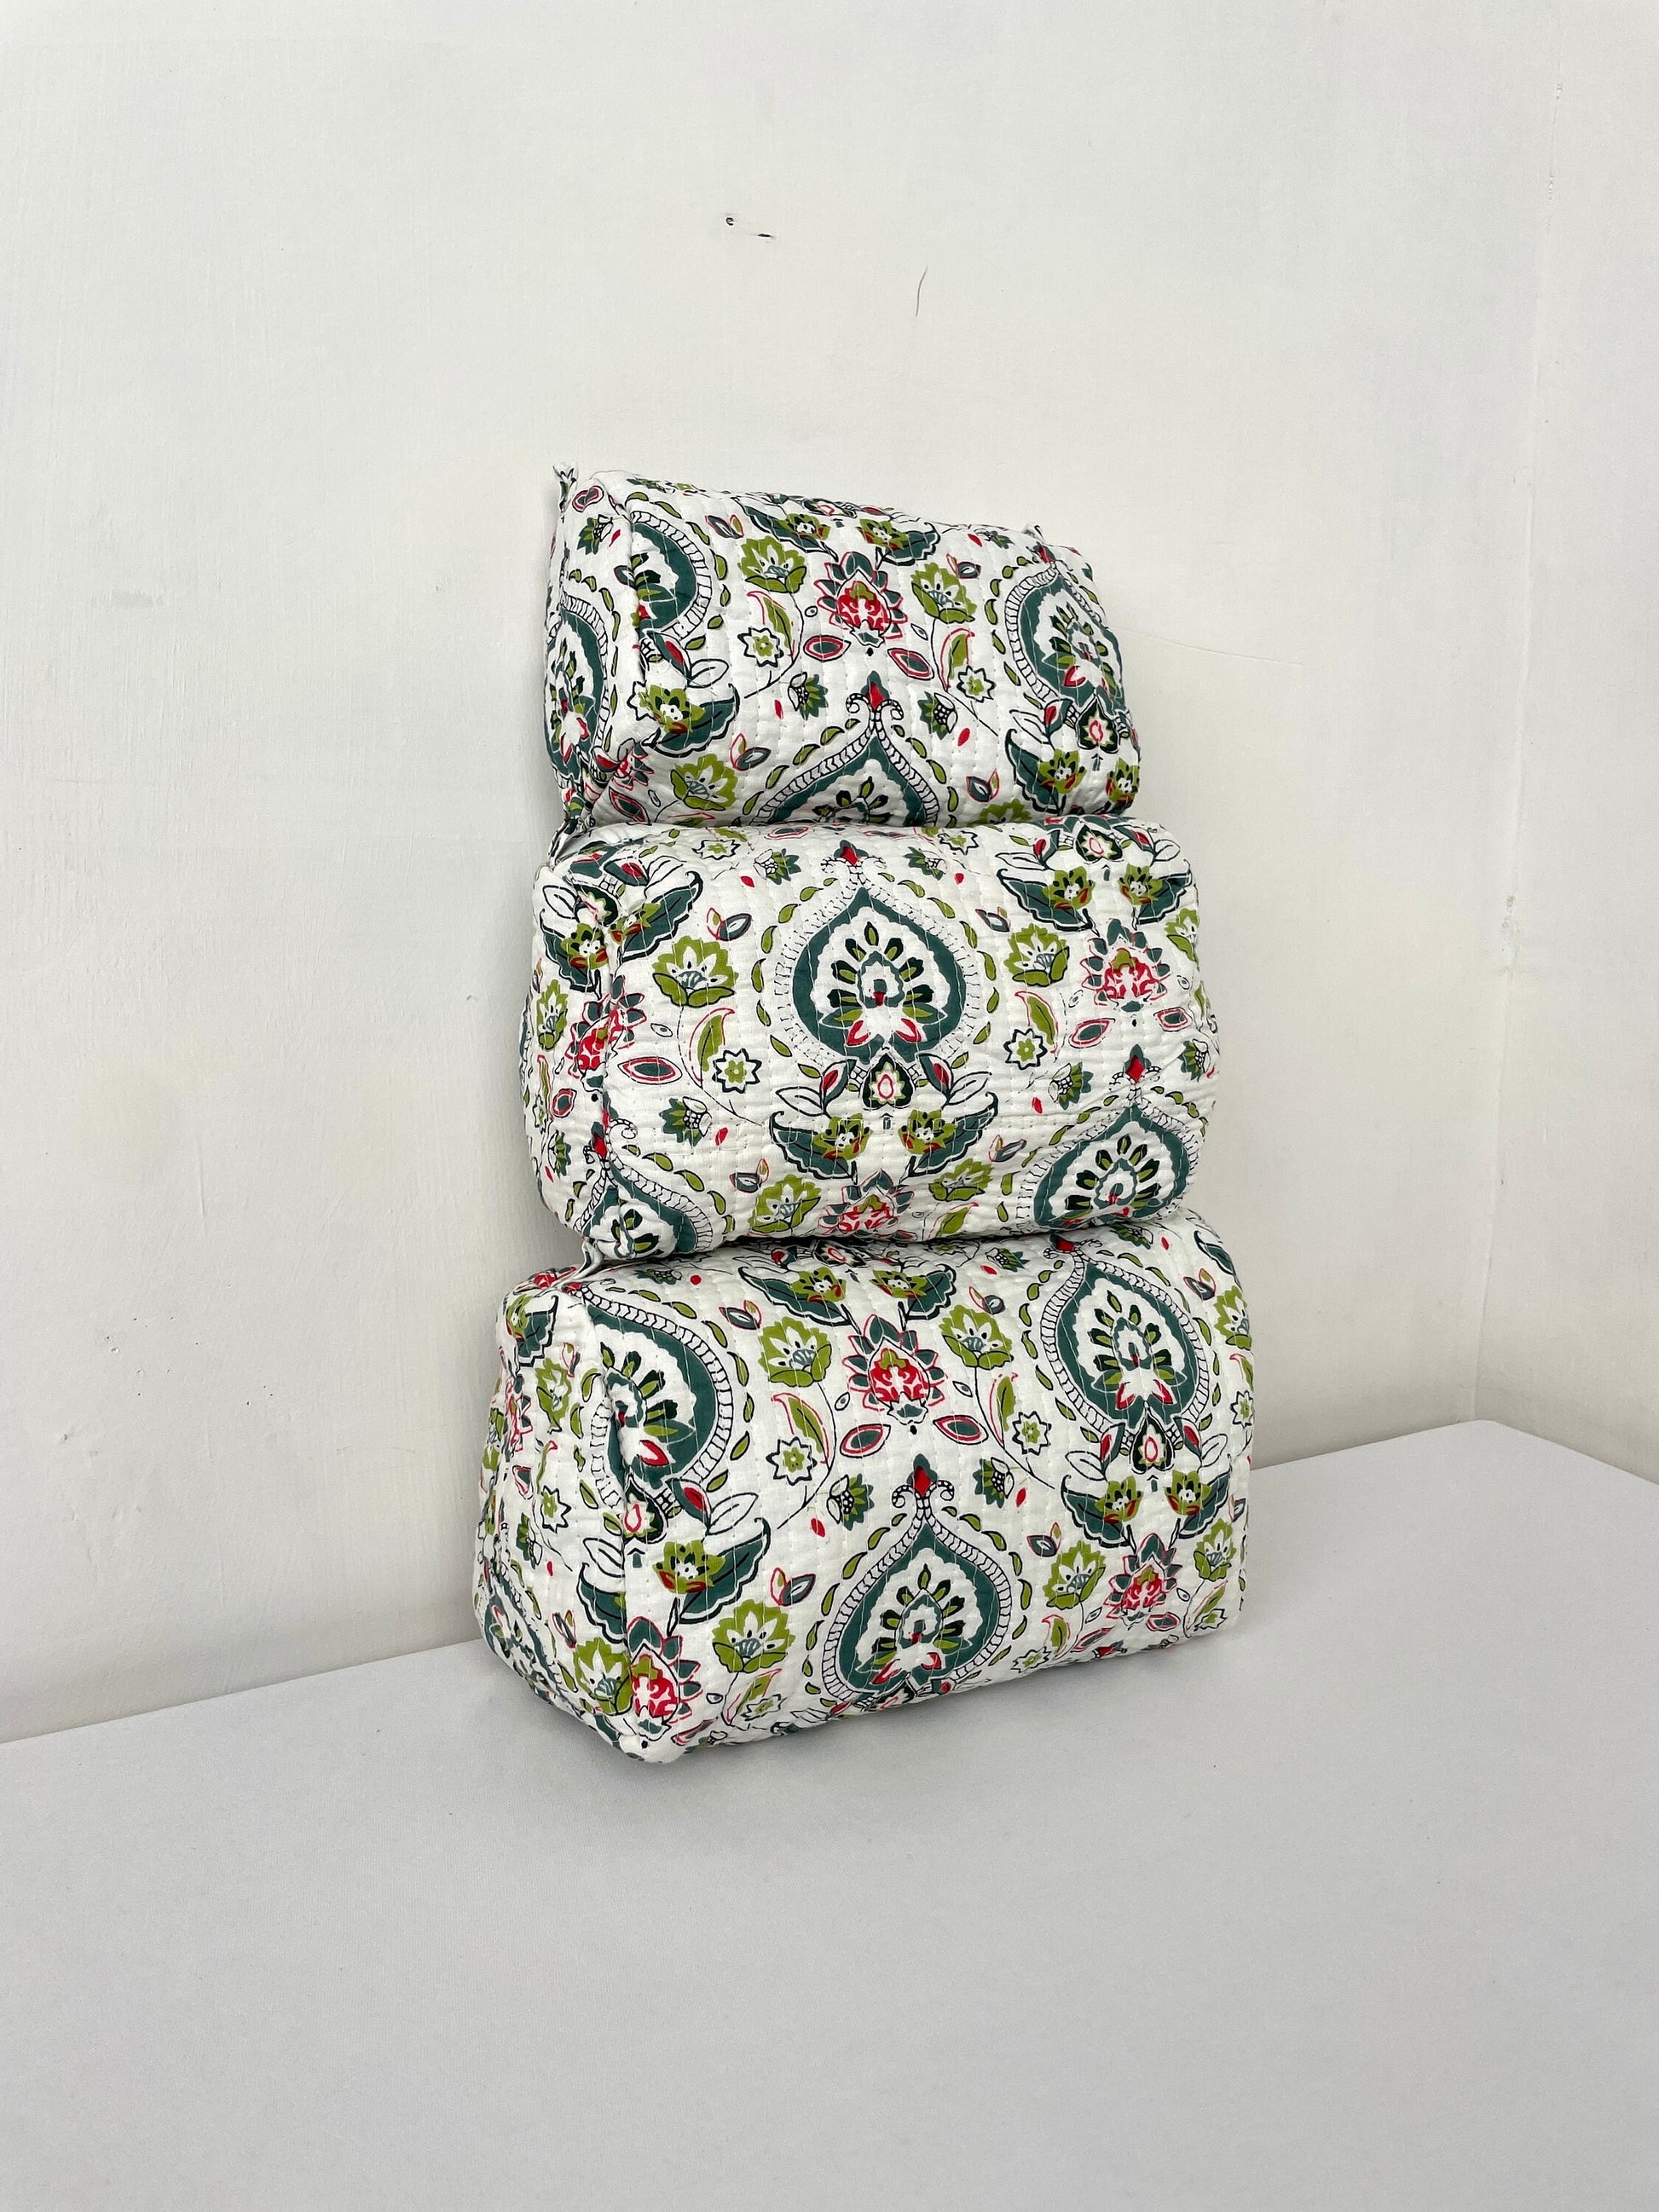 Cotton Quilted Toiletry Bag, Elegant Floral Hand Block Print Fabric Wash Bag, Pack of 3 White & Green Makeup Bag, Gift for She, Her